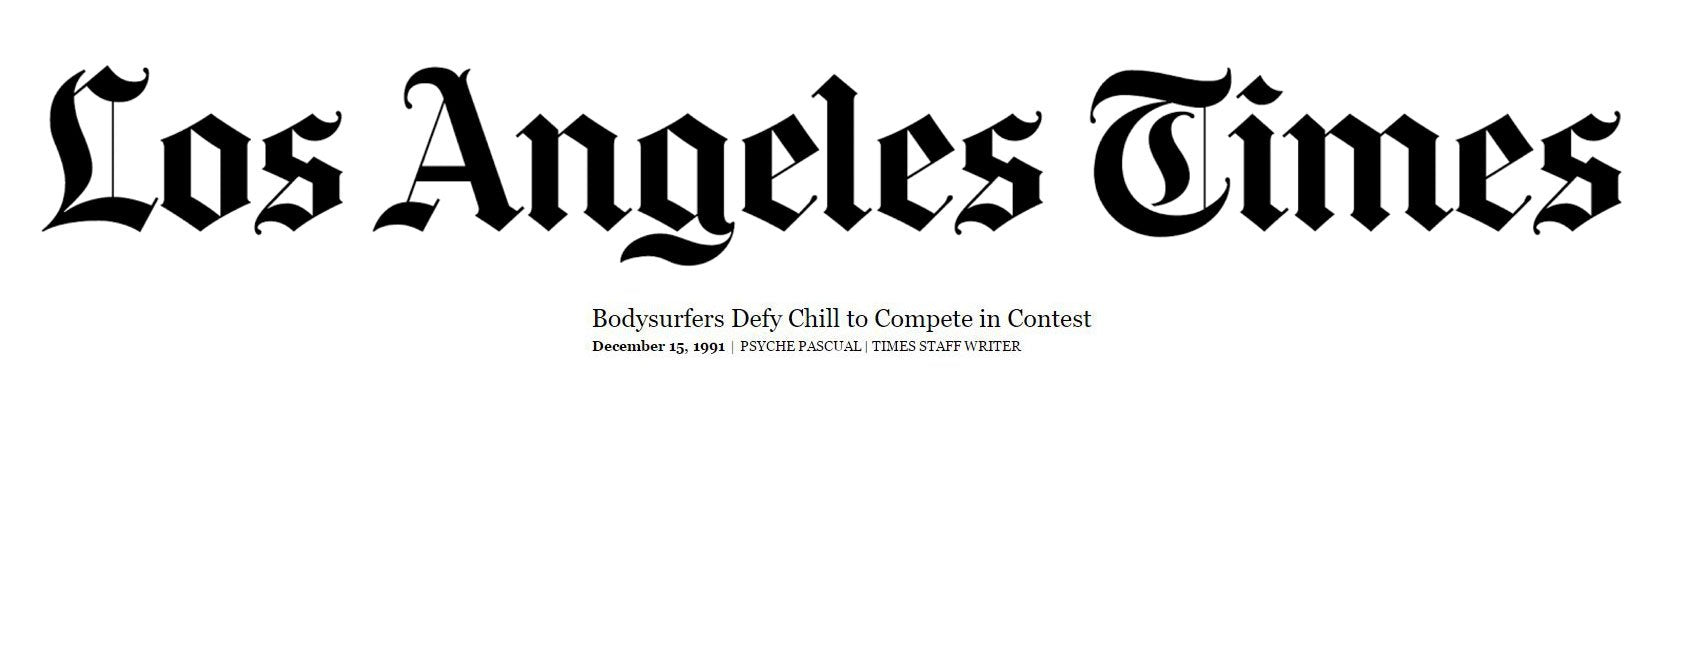 Bodysurfers Defy Chills - This Day in 1991, An Article by the Los Angeles Times